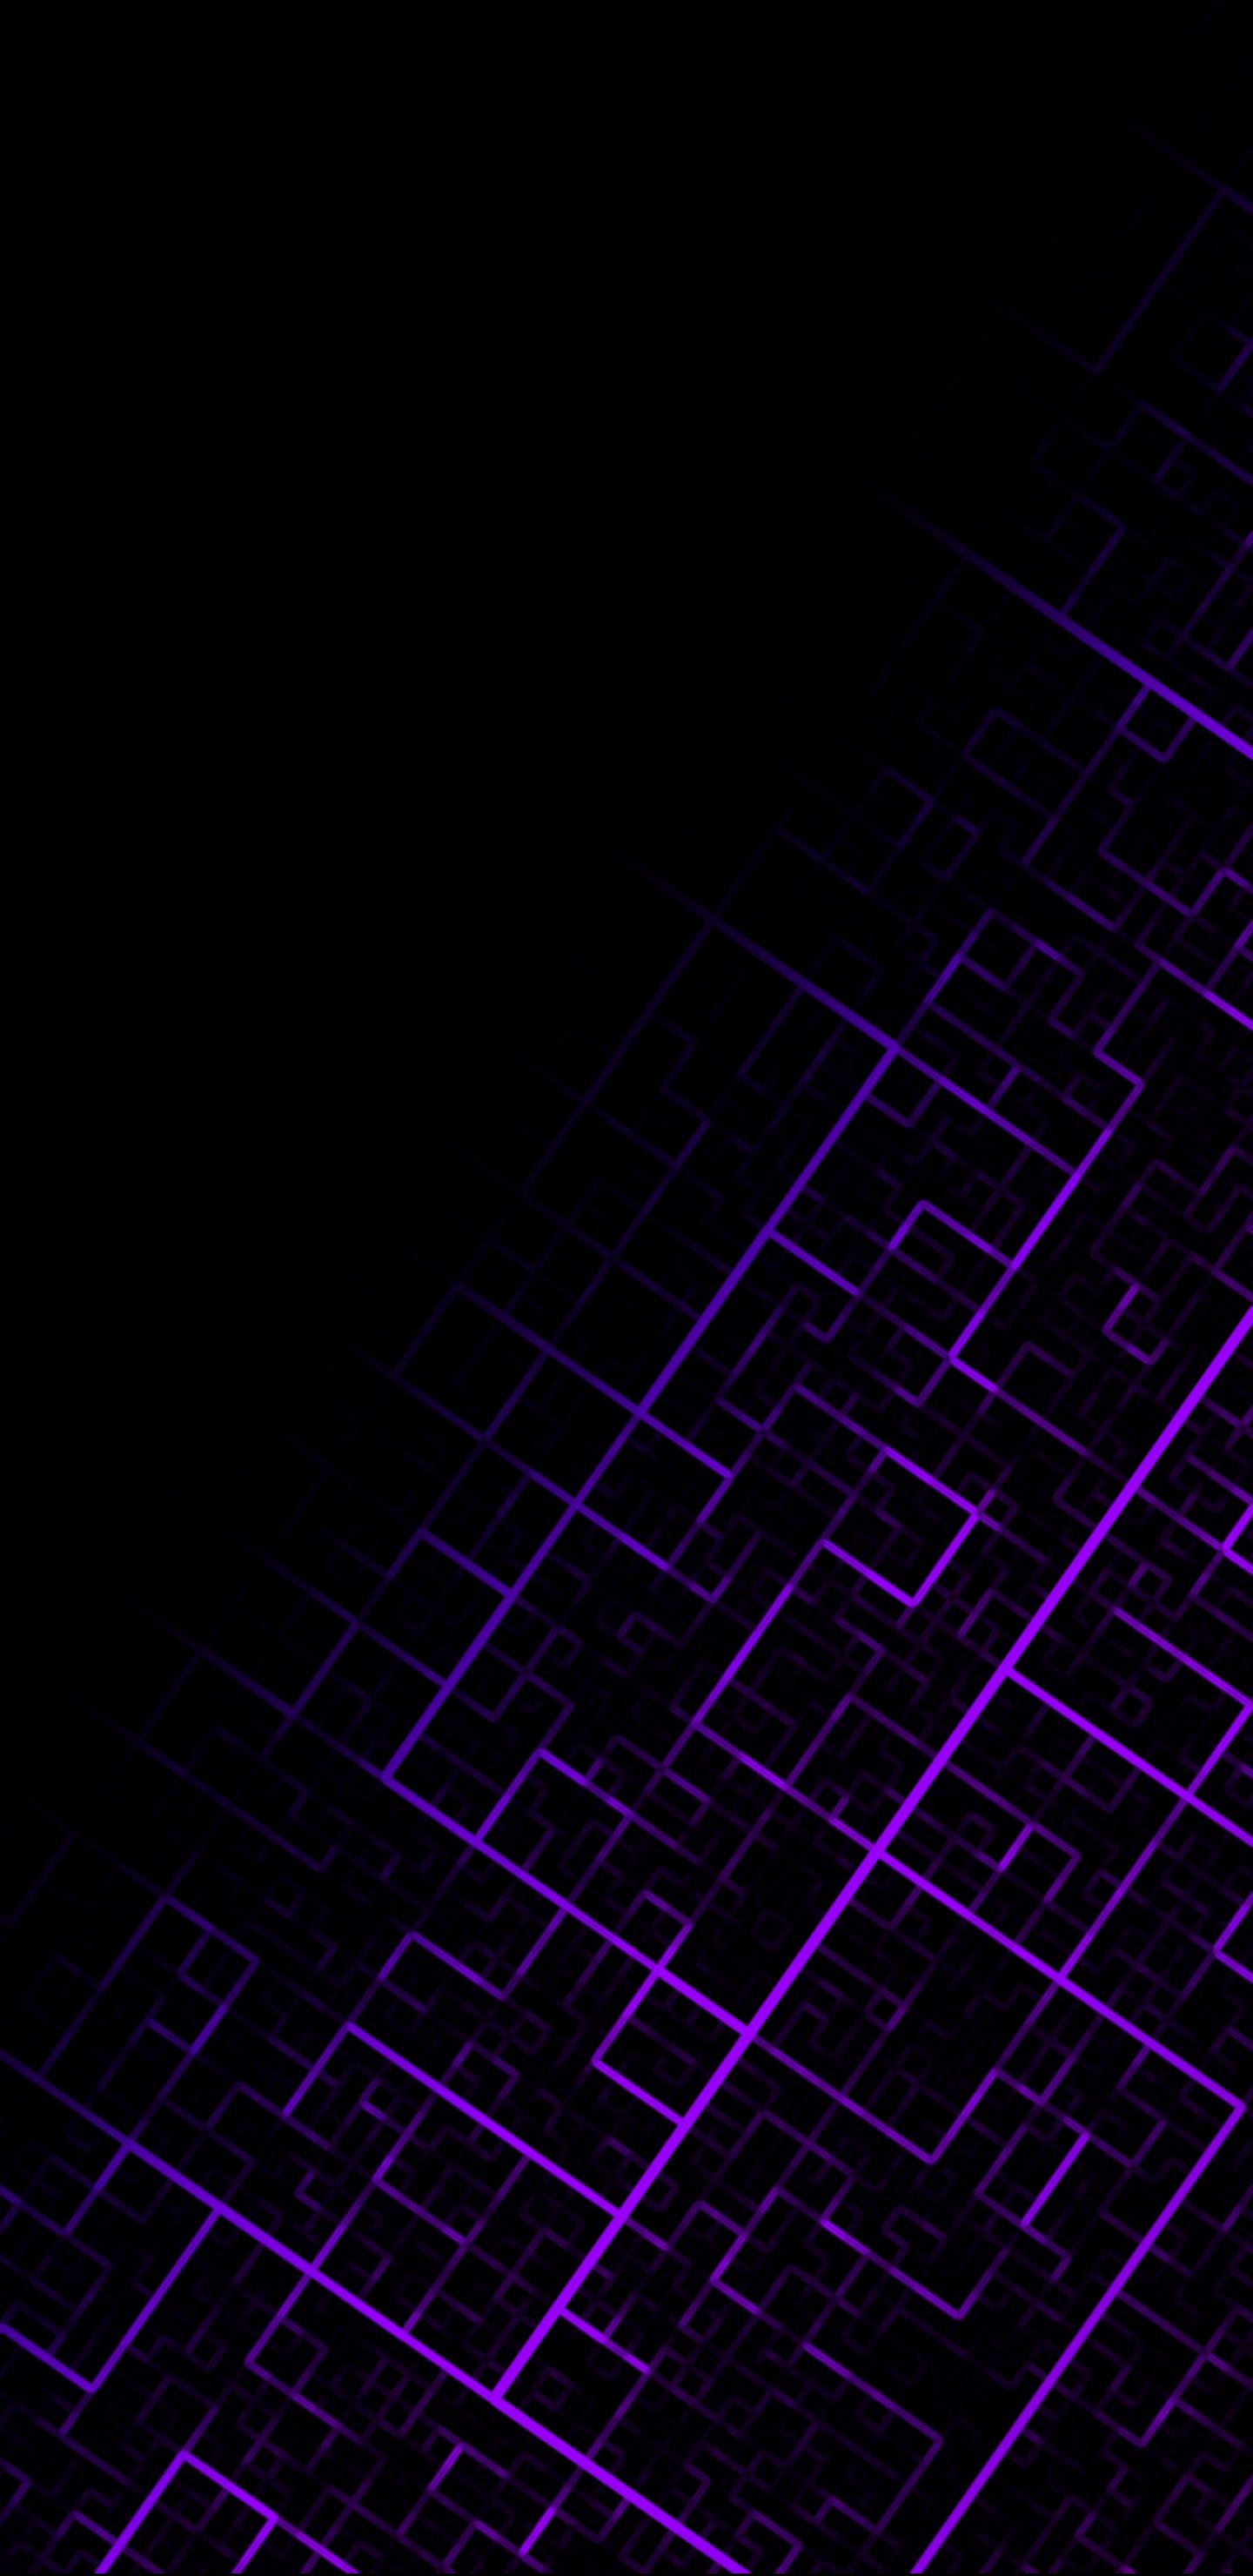 91538 free wallpaper 240x320 for phone, download images purple, geometric, lines, violet 240x320 for mobile